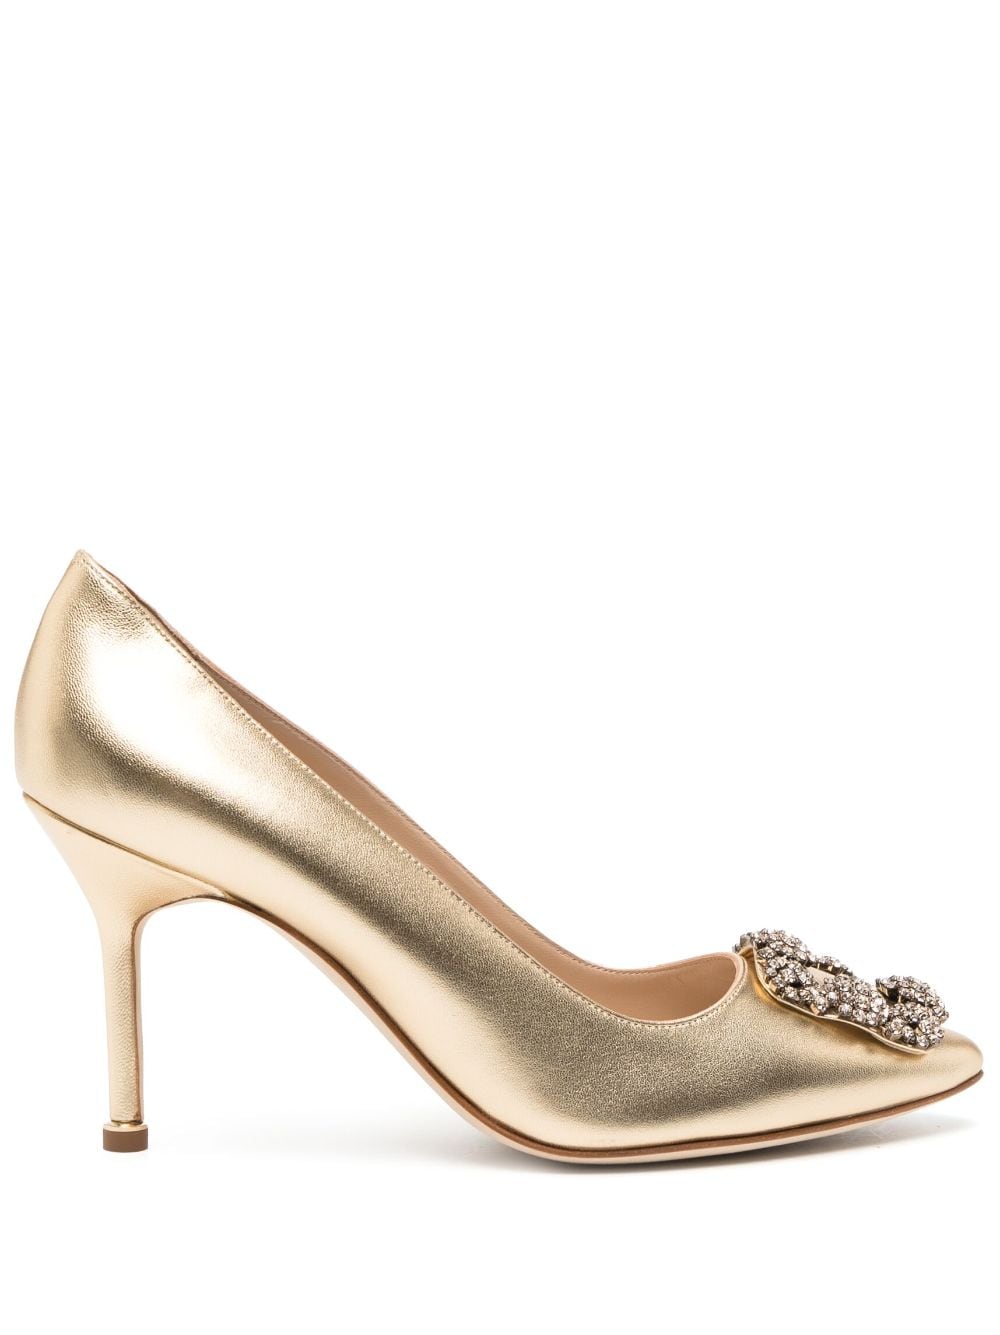 Manolo Blahnik Hangisi 90mm Leather Pumps In Gold